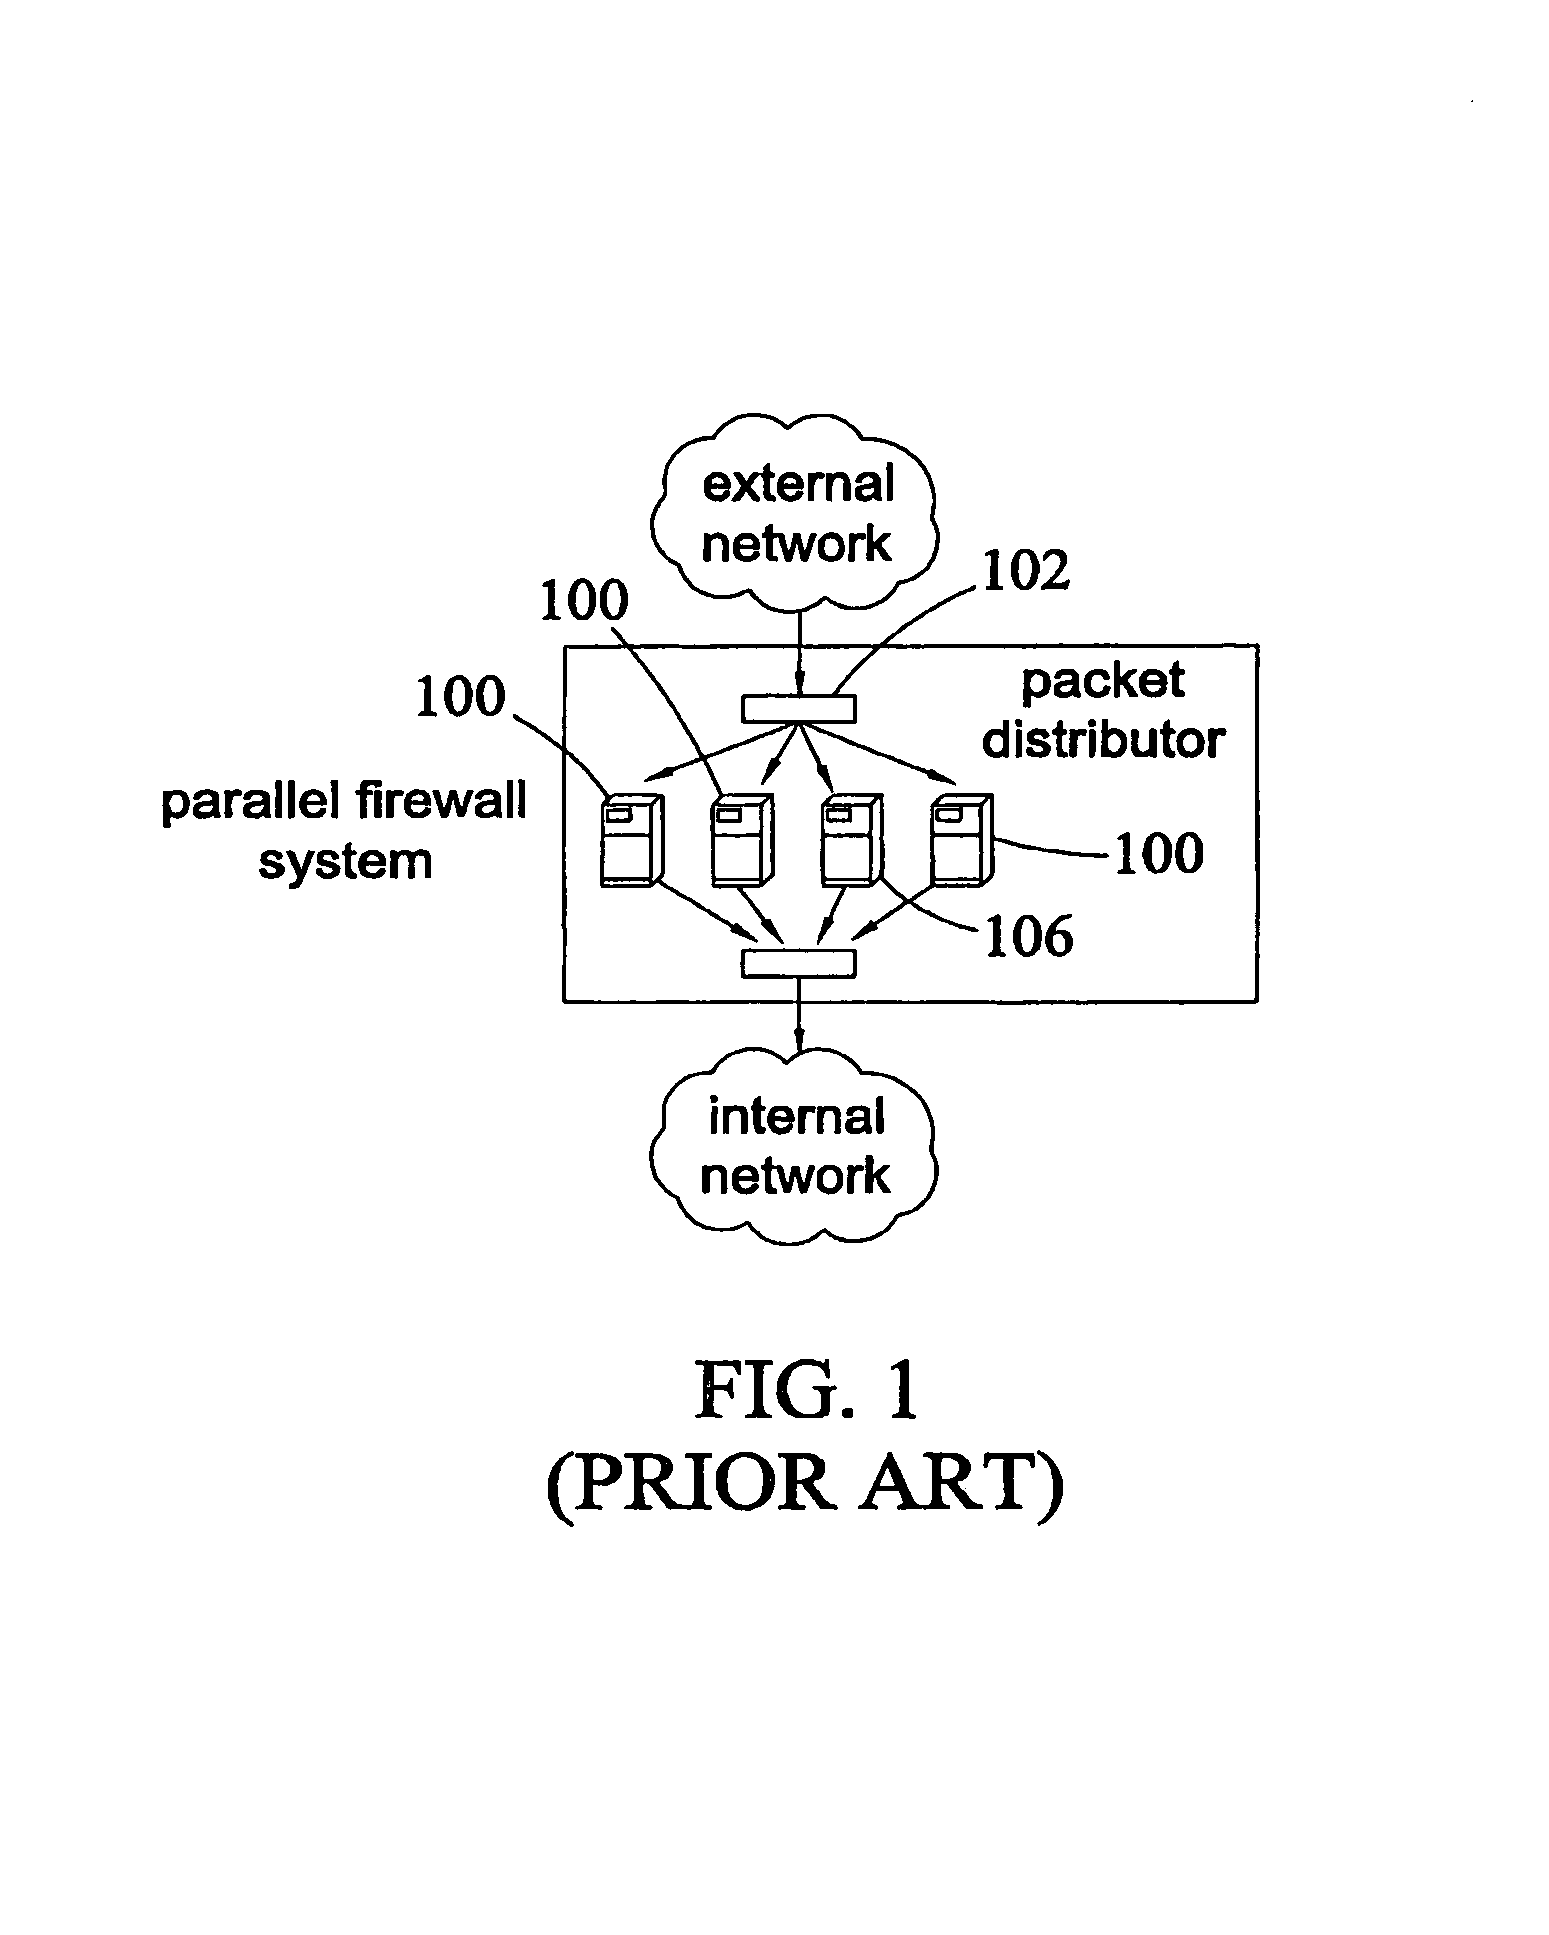 Method, systems, and computer program products for implementing function-parallel network firewall